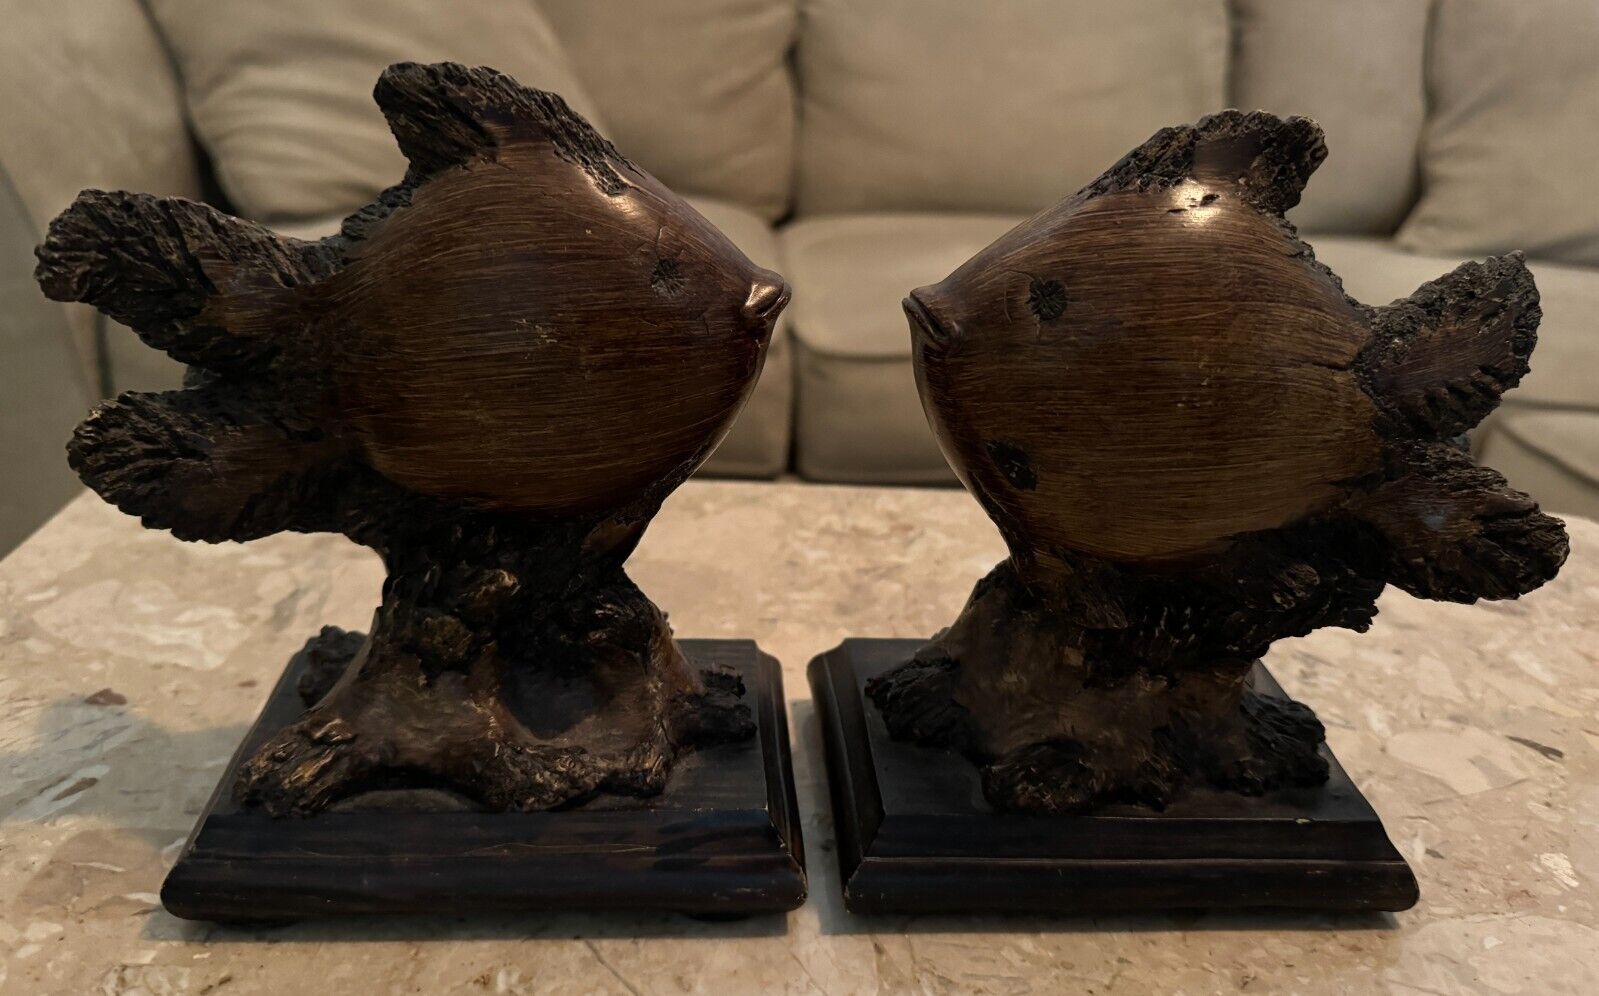 2 Large Fish Figurines Bookends exotic resin burled Wood 6x3.5x7